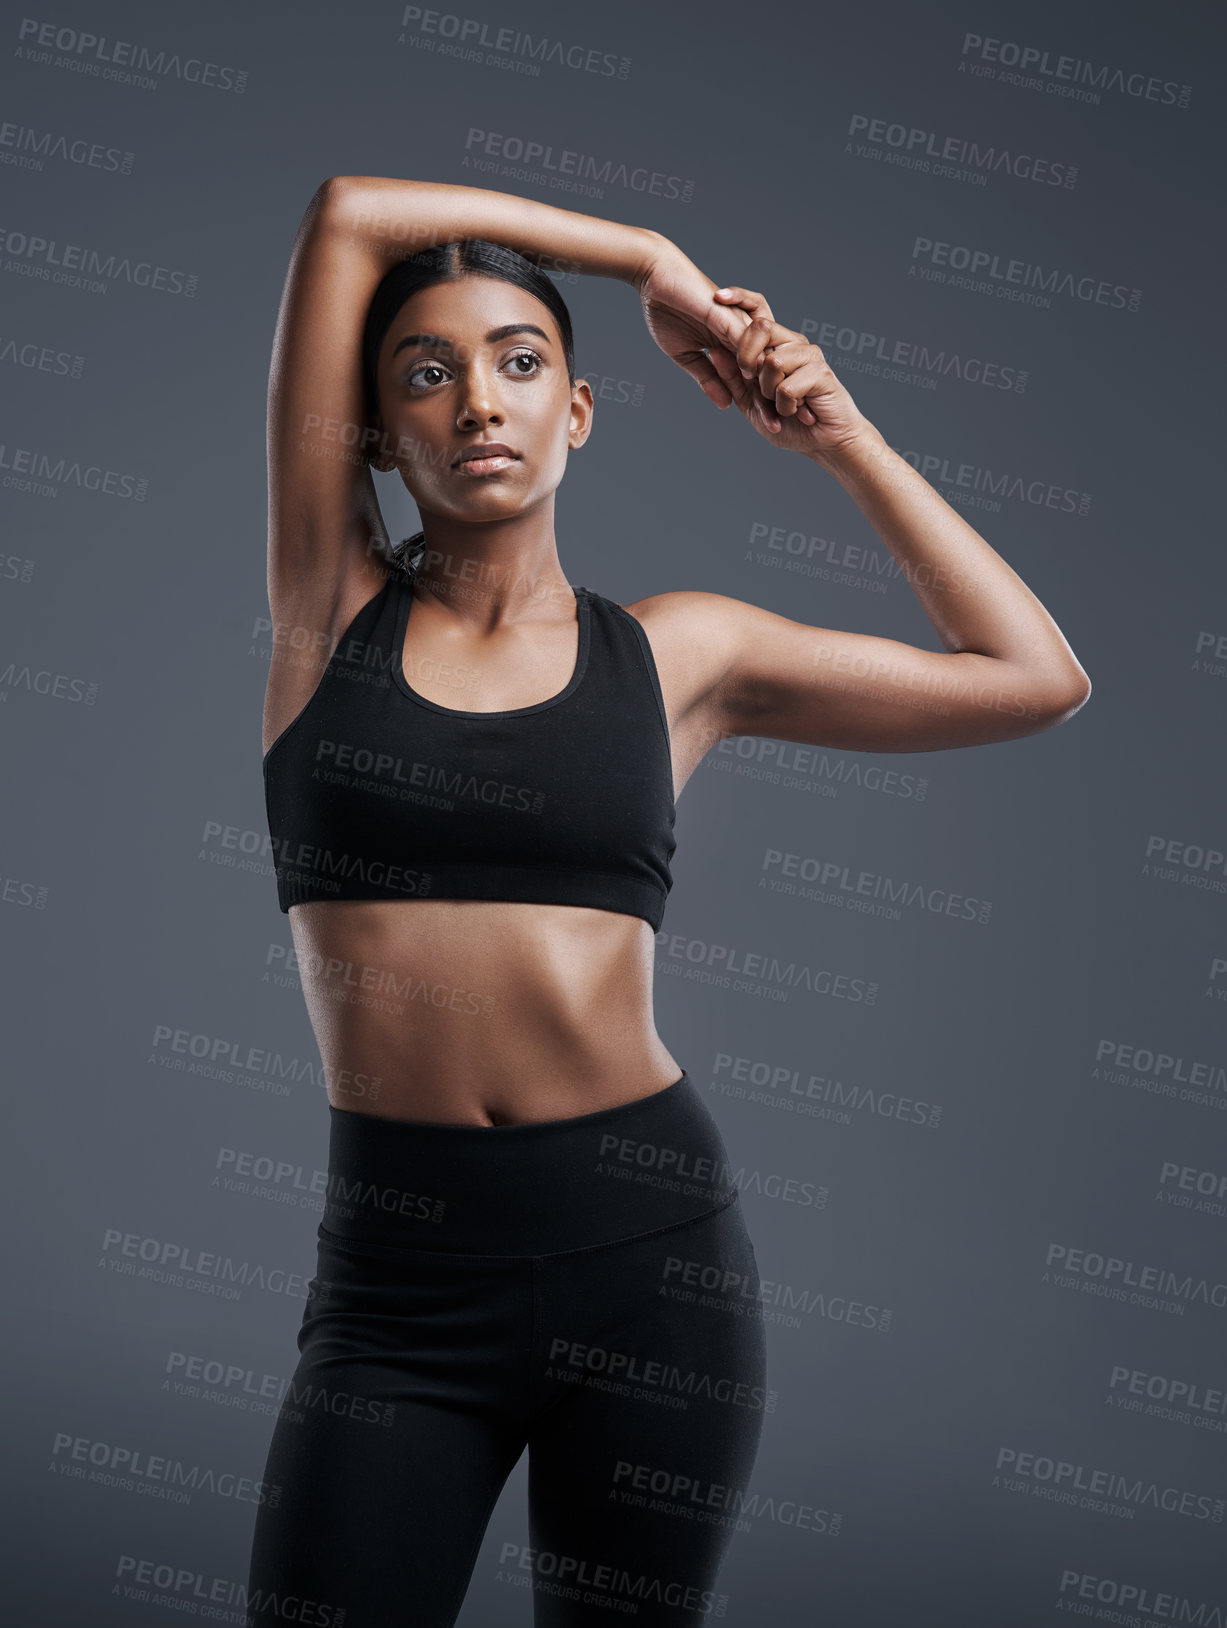 Buy stock photo Idea, mockup and stretching with an athlete woman in studio on a gray background for fitness or health. Exercise, thinking and warm up with an attractive young female model training her body